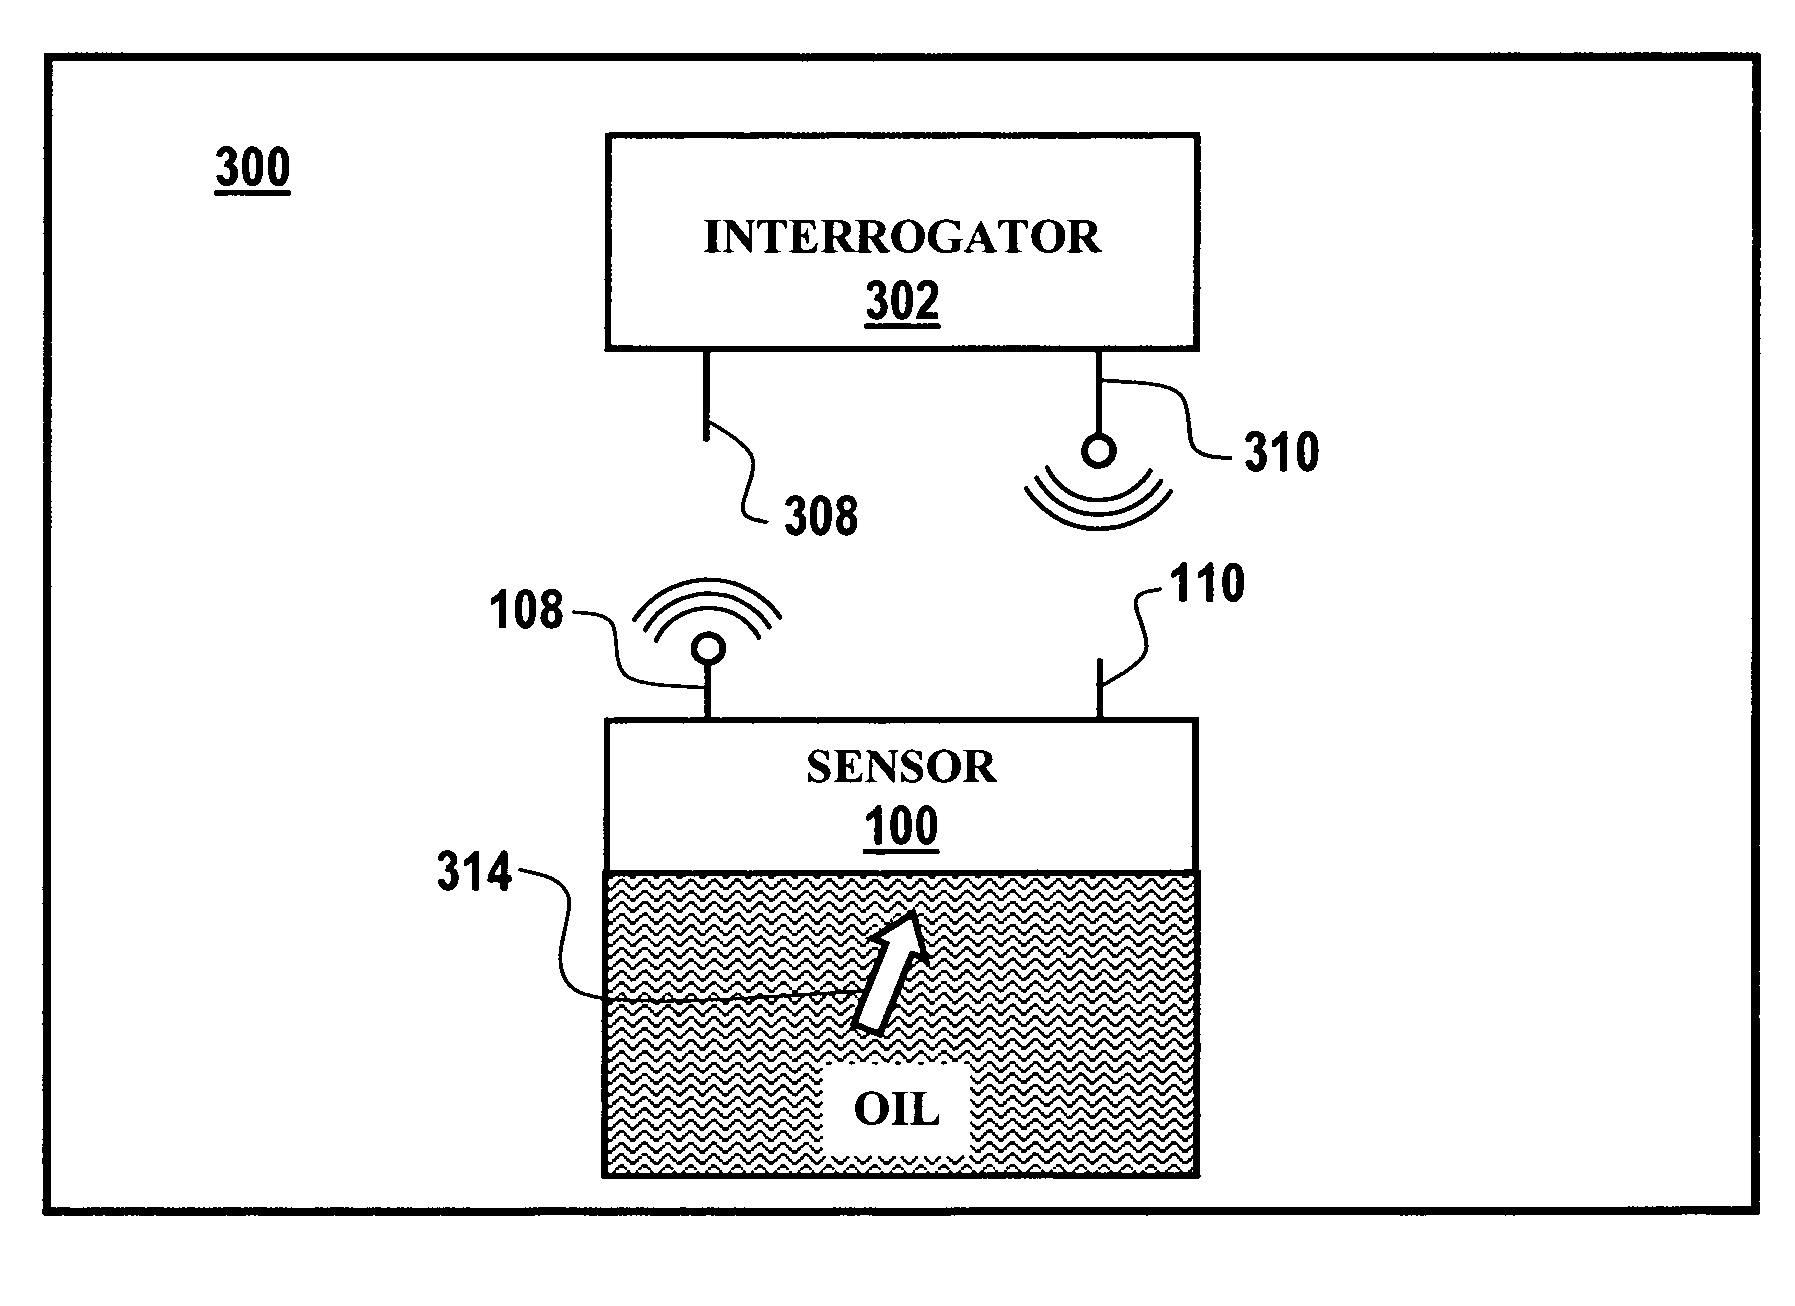 System and method to determine oil quality utilizing a single multi-function surface acoustic wave sensor